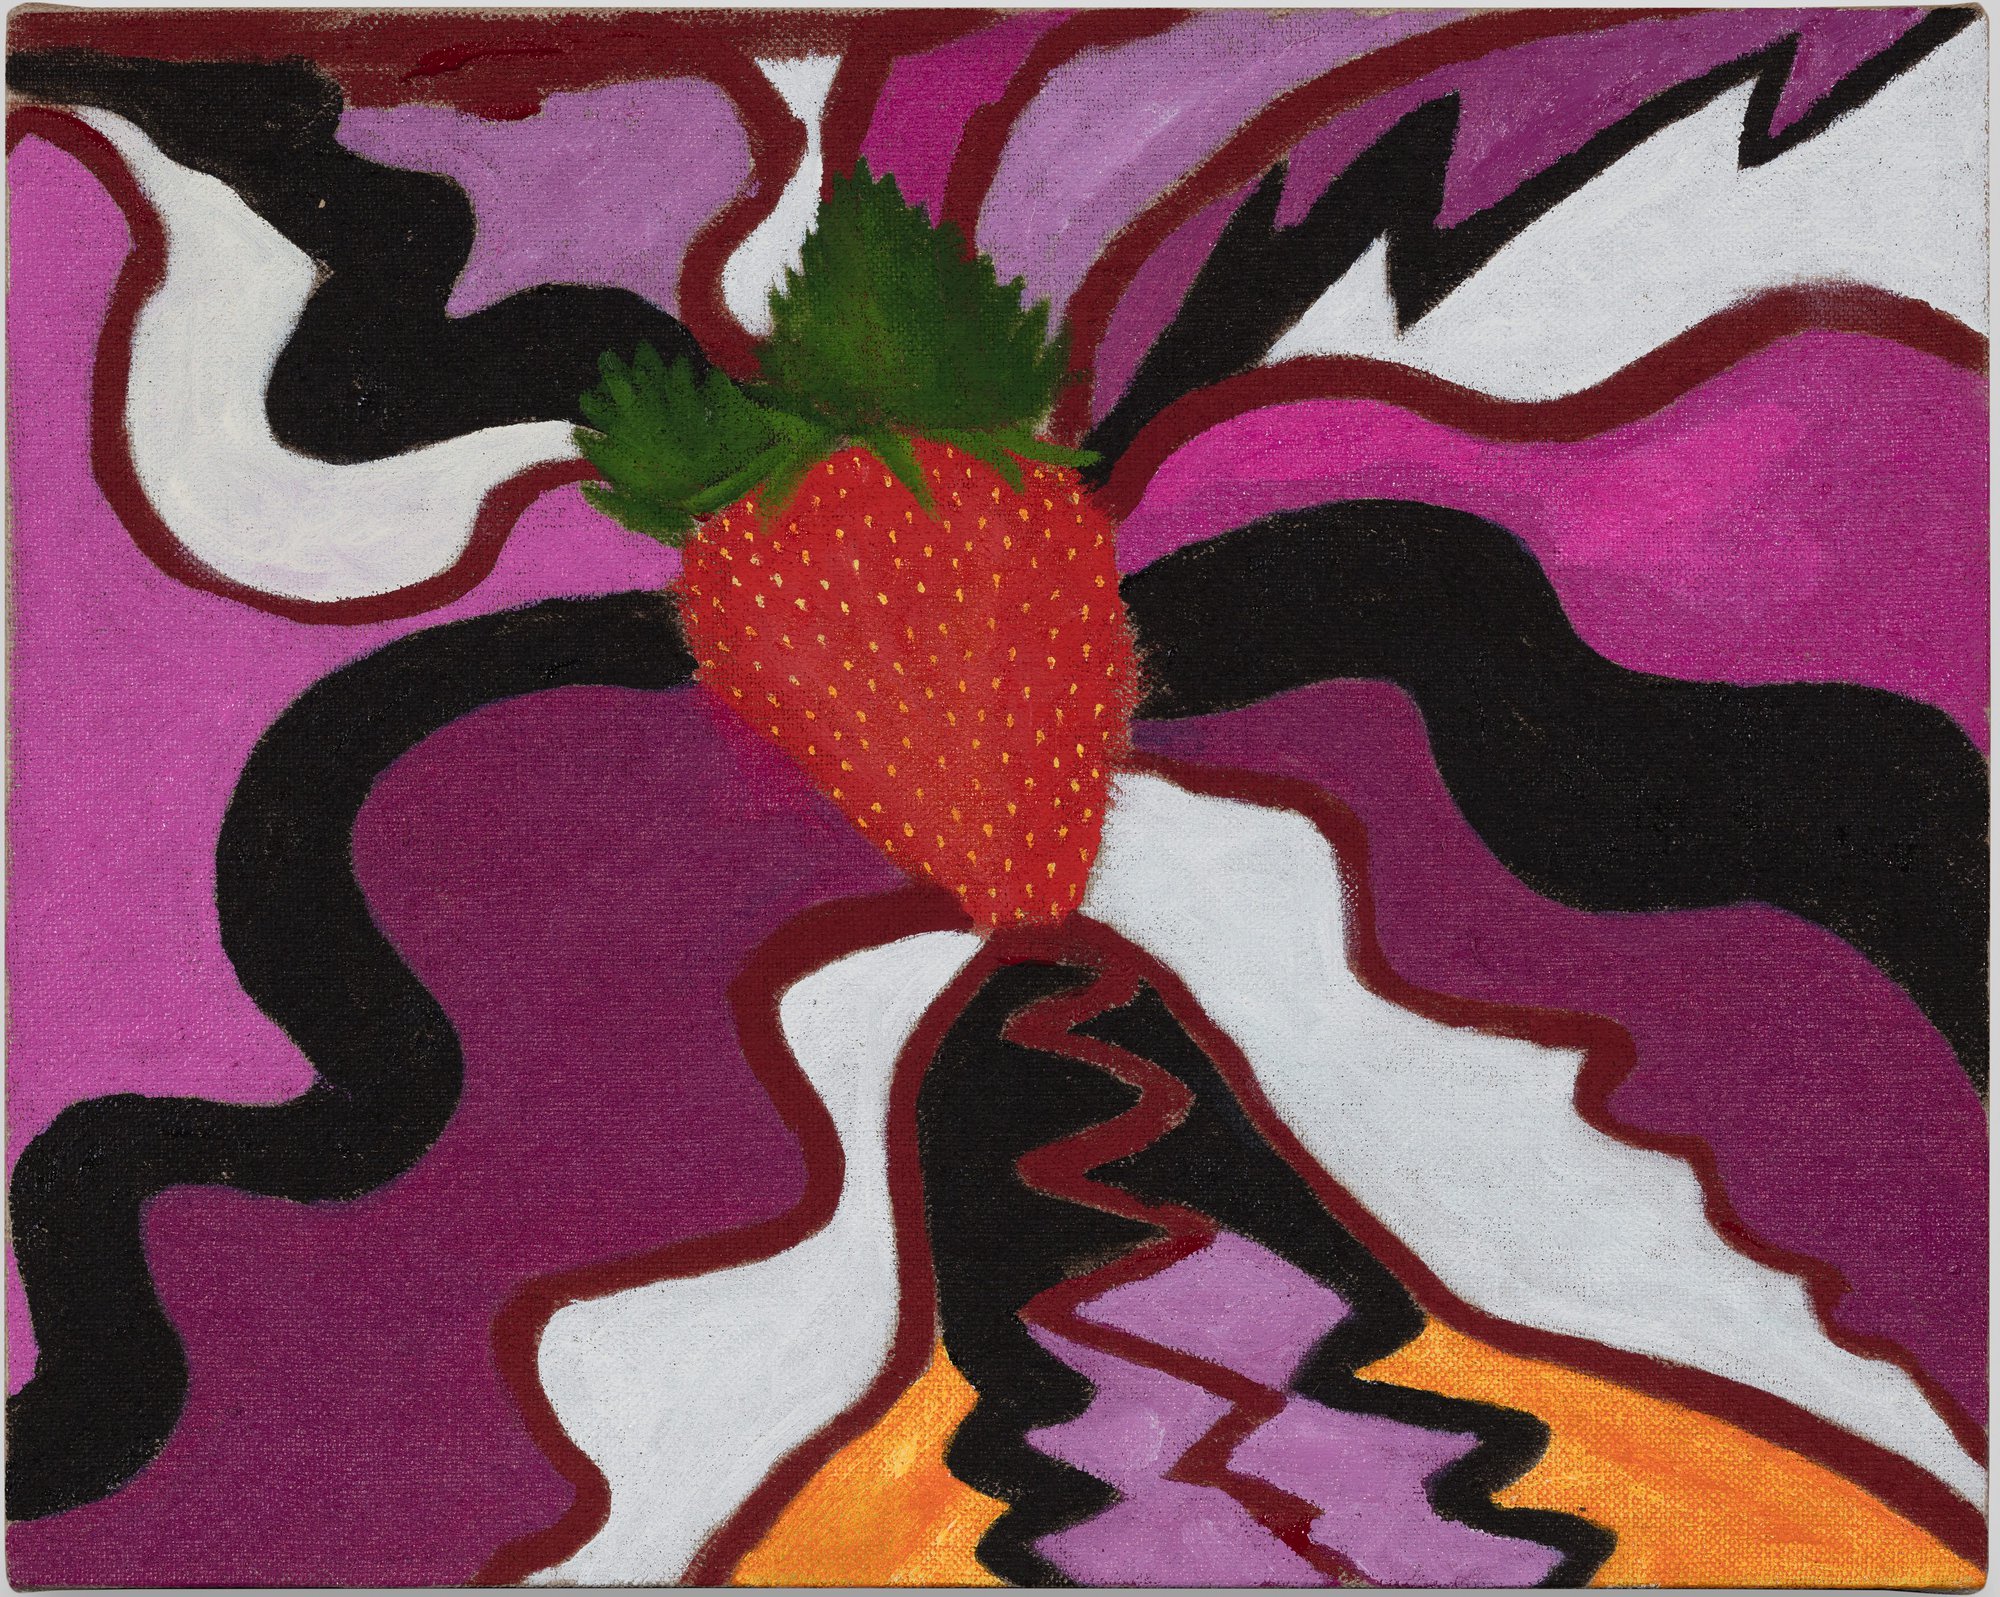 Leidy Churchman, The Between is Ringing (Strawberry) (Braiding Sweetgrass), oil on linen, 20.4 x 25.9 cm (8 x 10 1/4 in), 2020